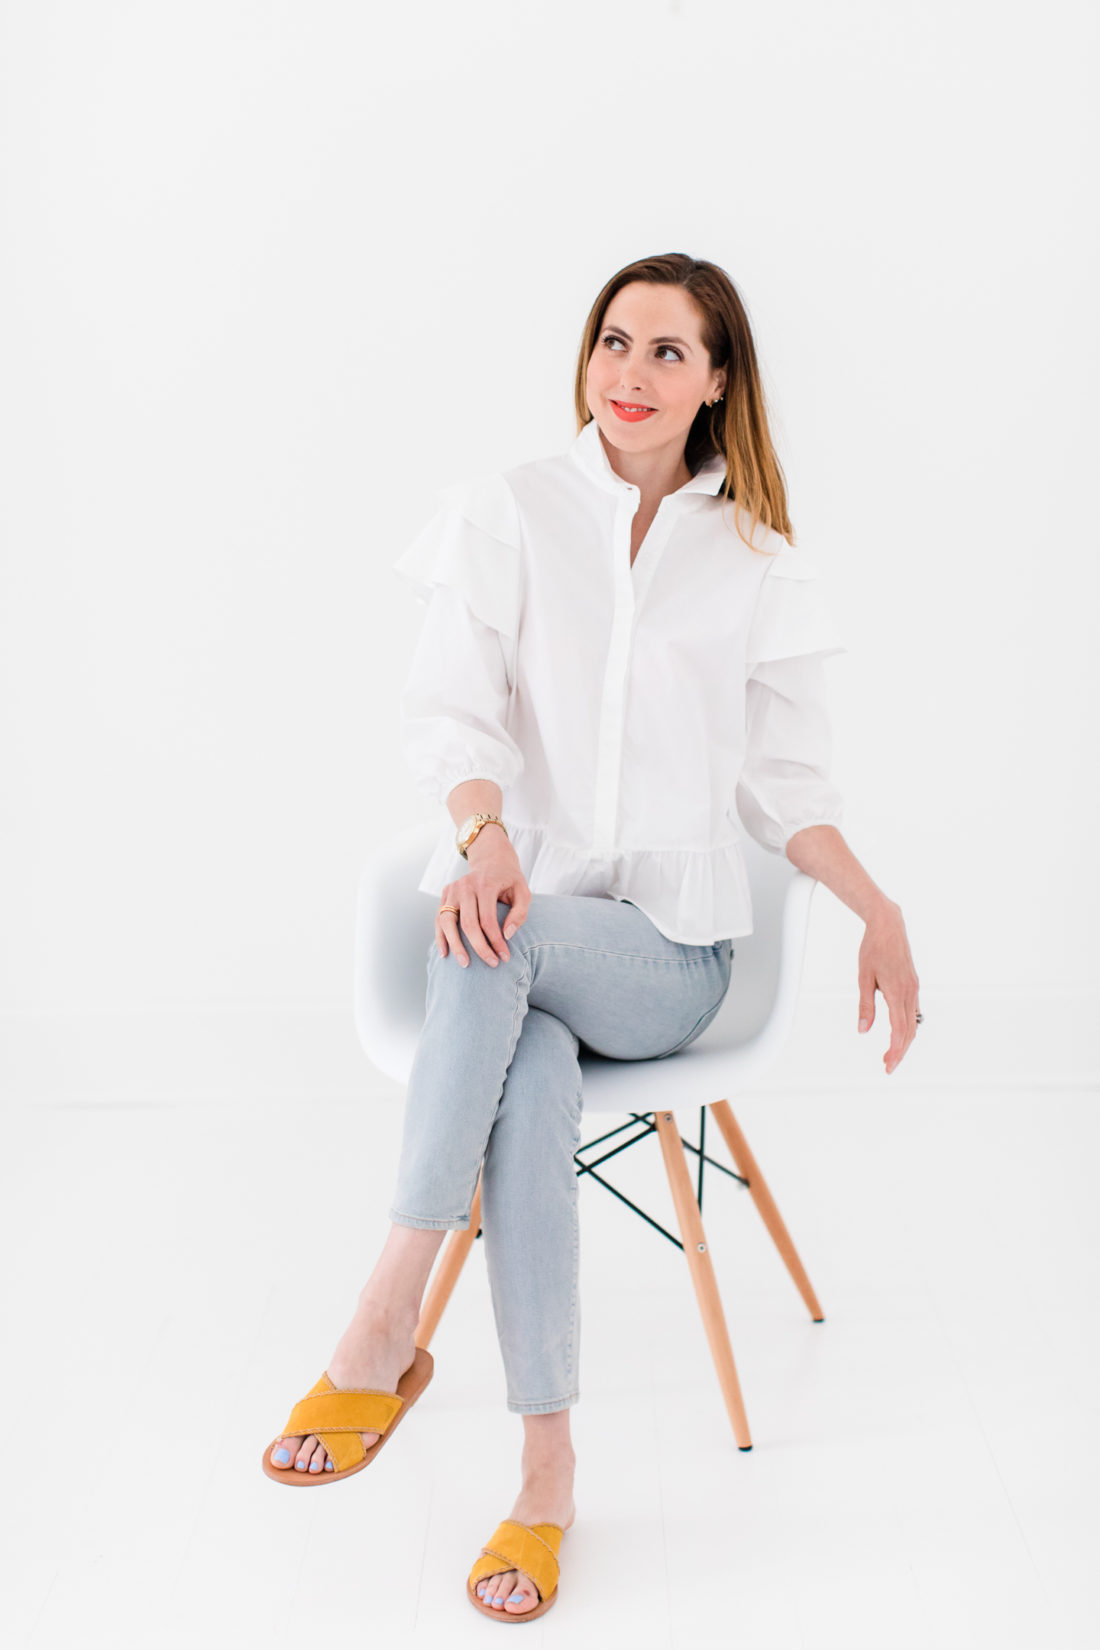 Eva Amurri Martino wears a white button down shirt with ruffle details and jeans with flats